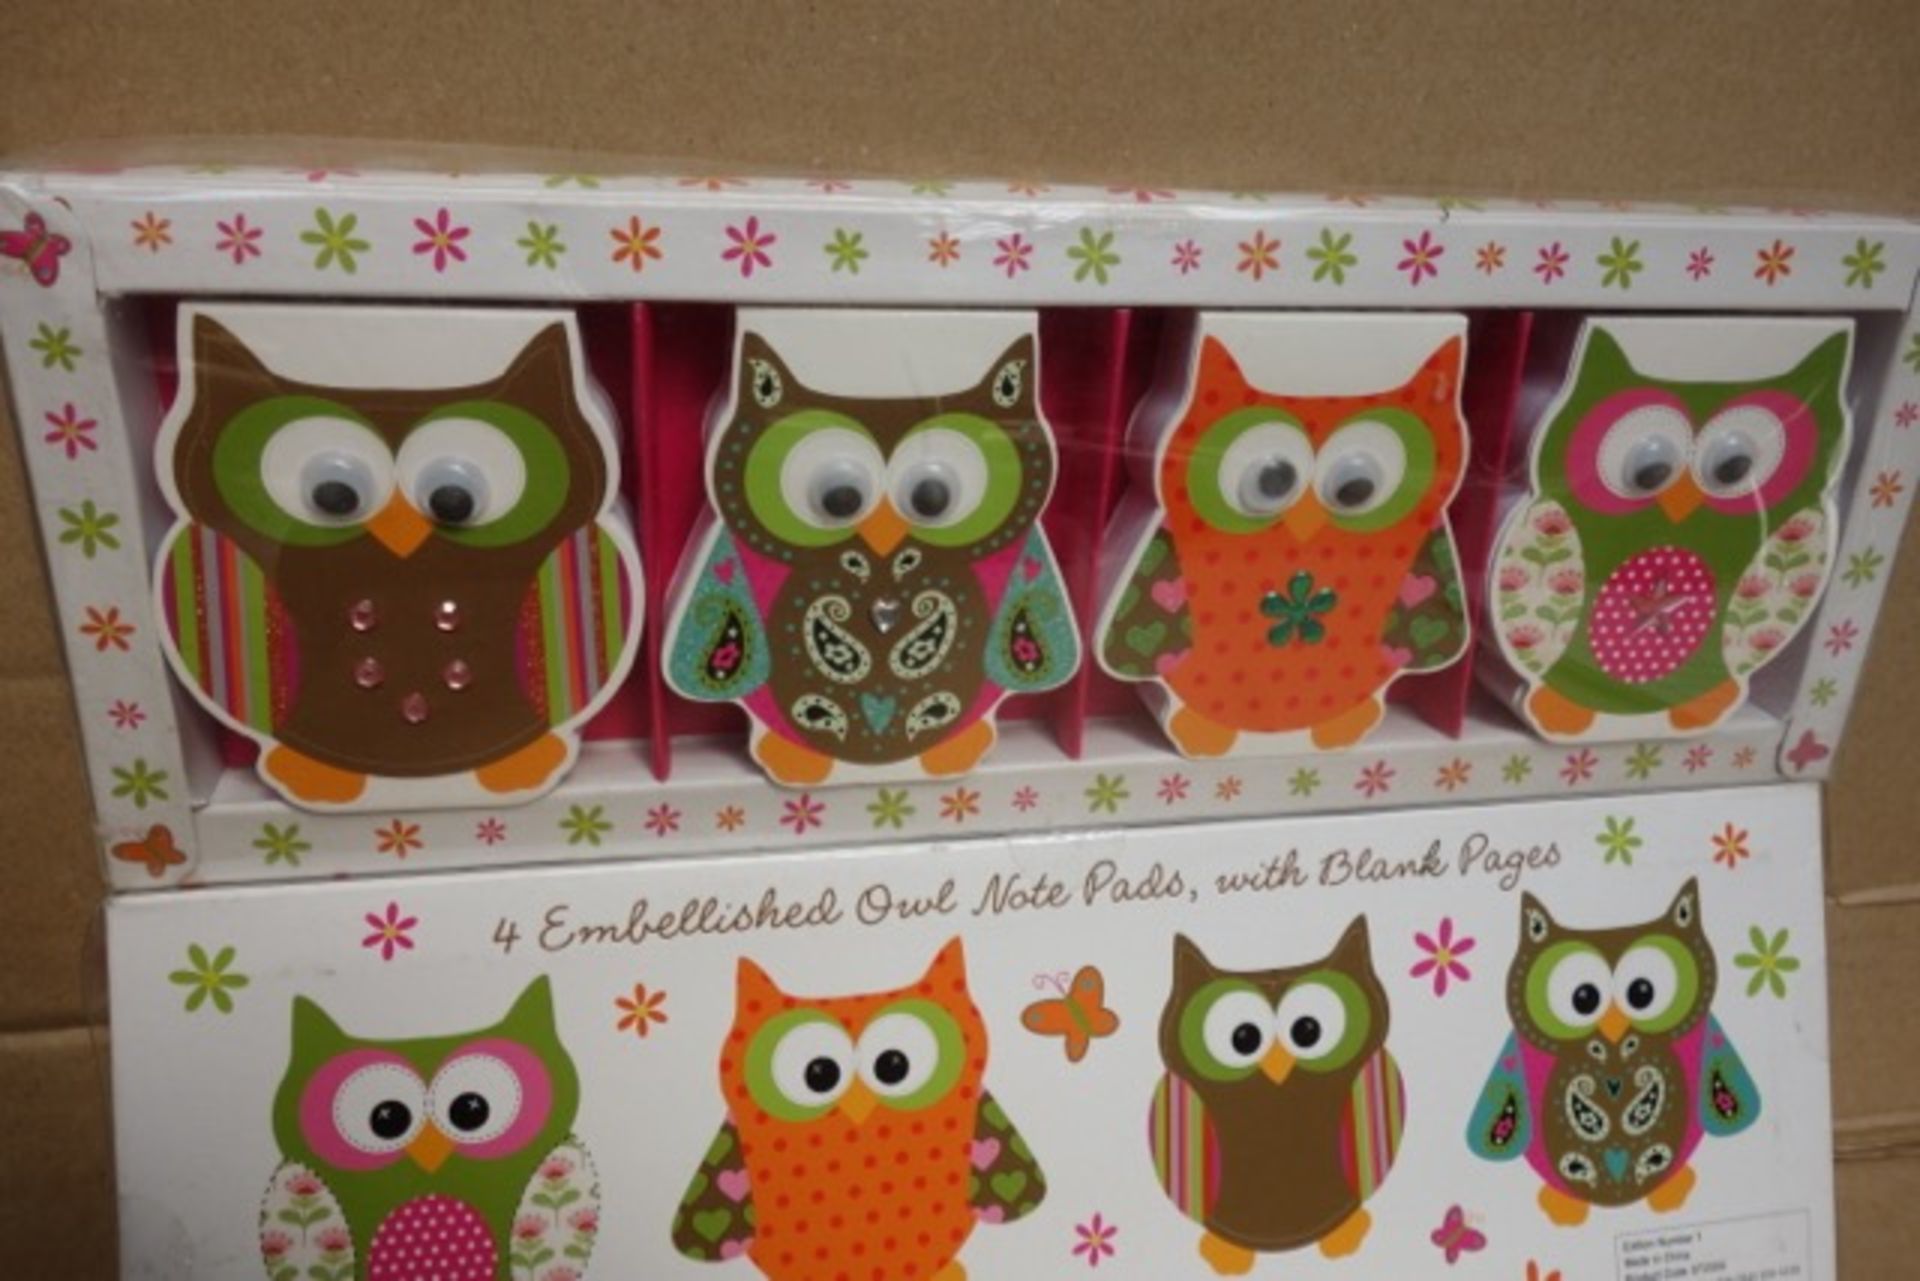 80 x Set's of 4 Embellished Owl Note Pads with Blank Pages. High quality, fun & trendy design. - Image 2 of 2